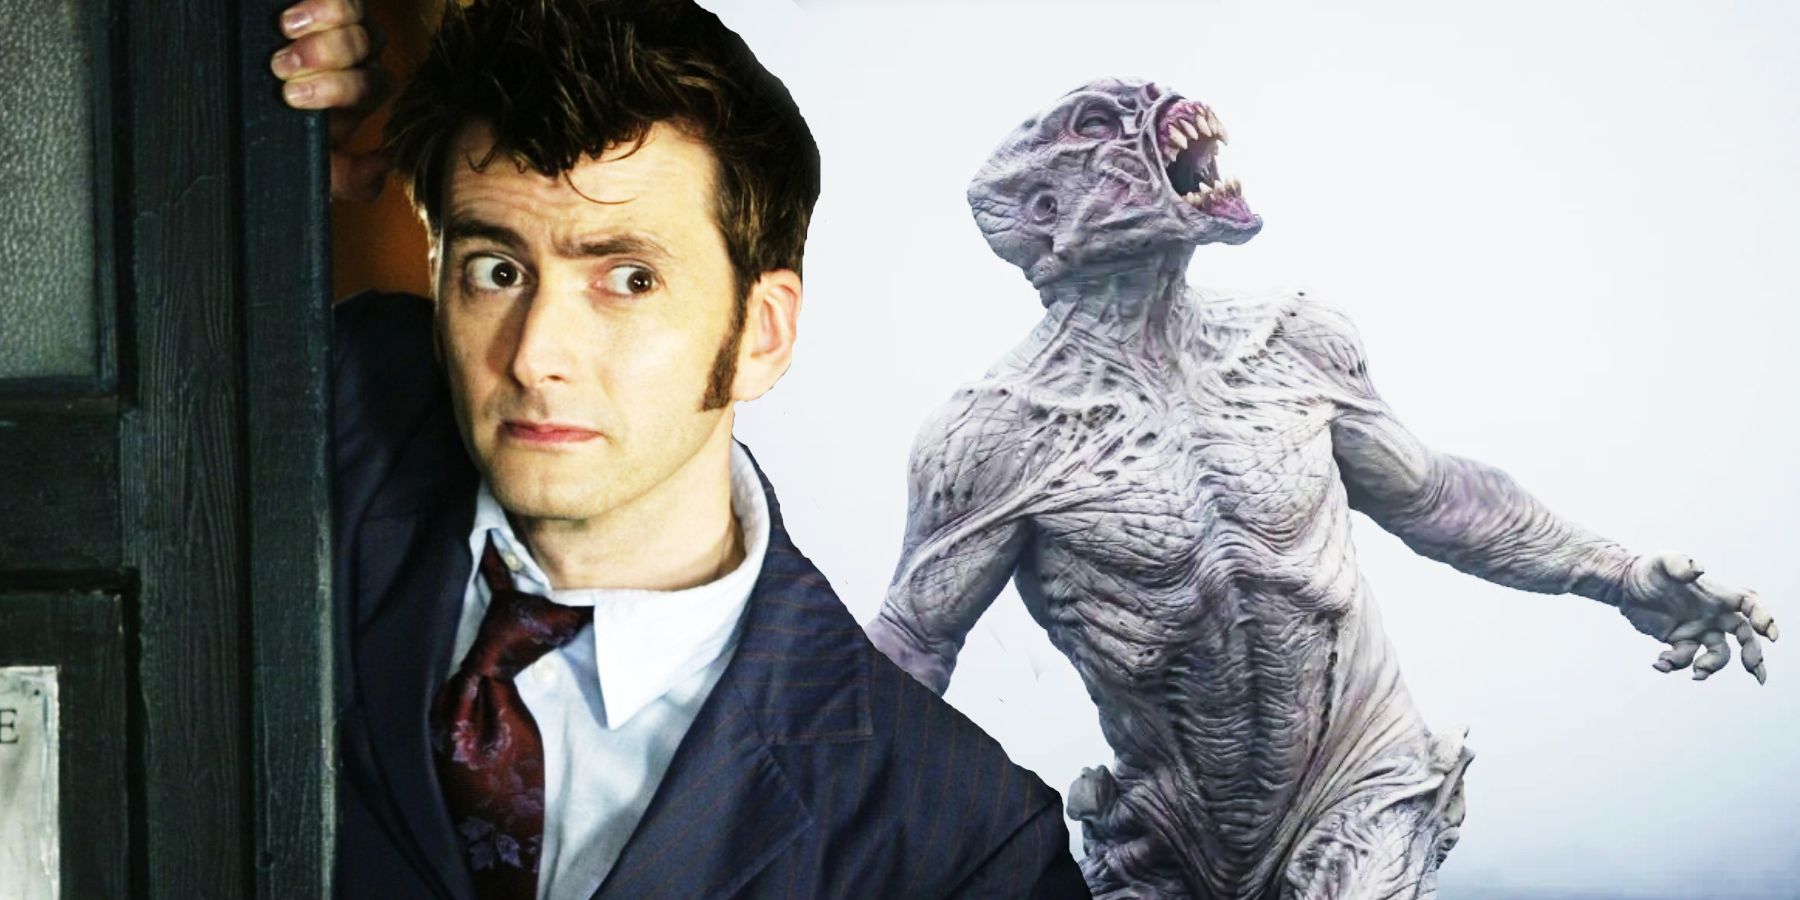 David Tennant as the Doctor and a Dreg from Orphan 55 in Doctor Who